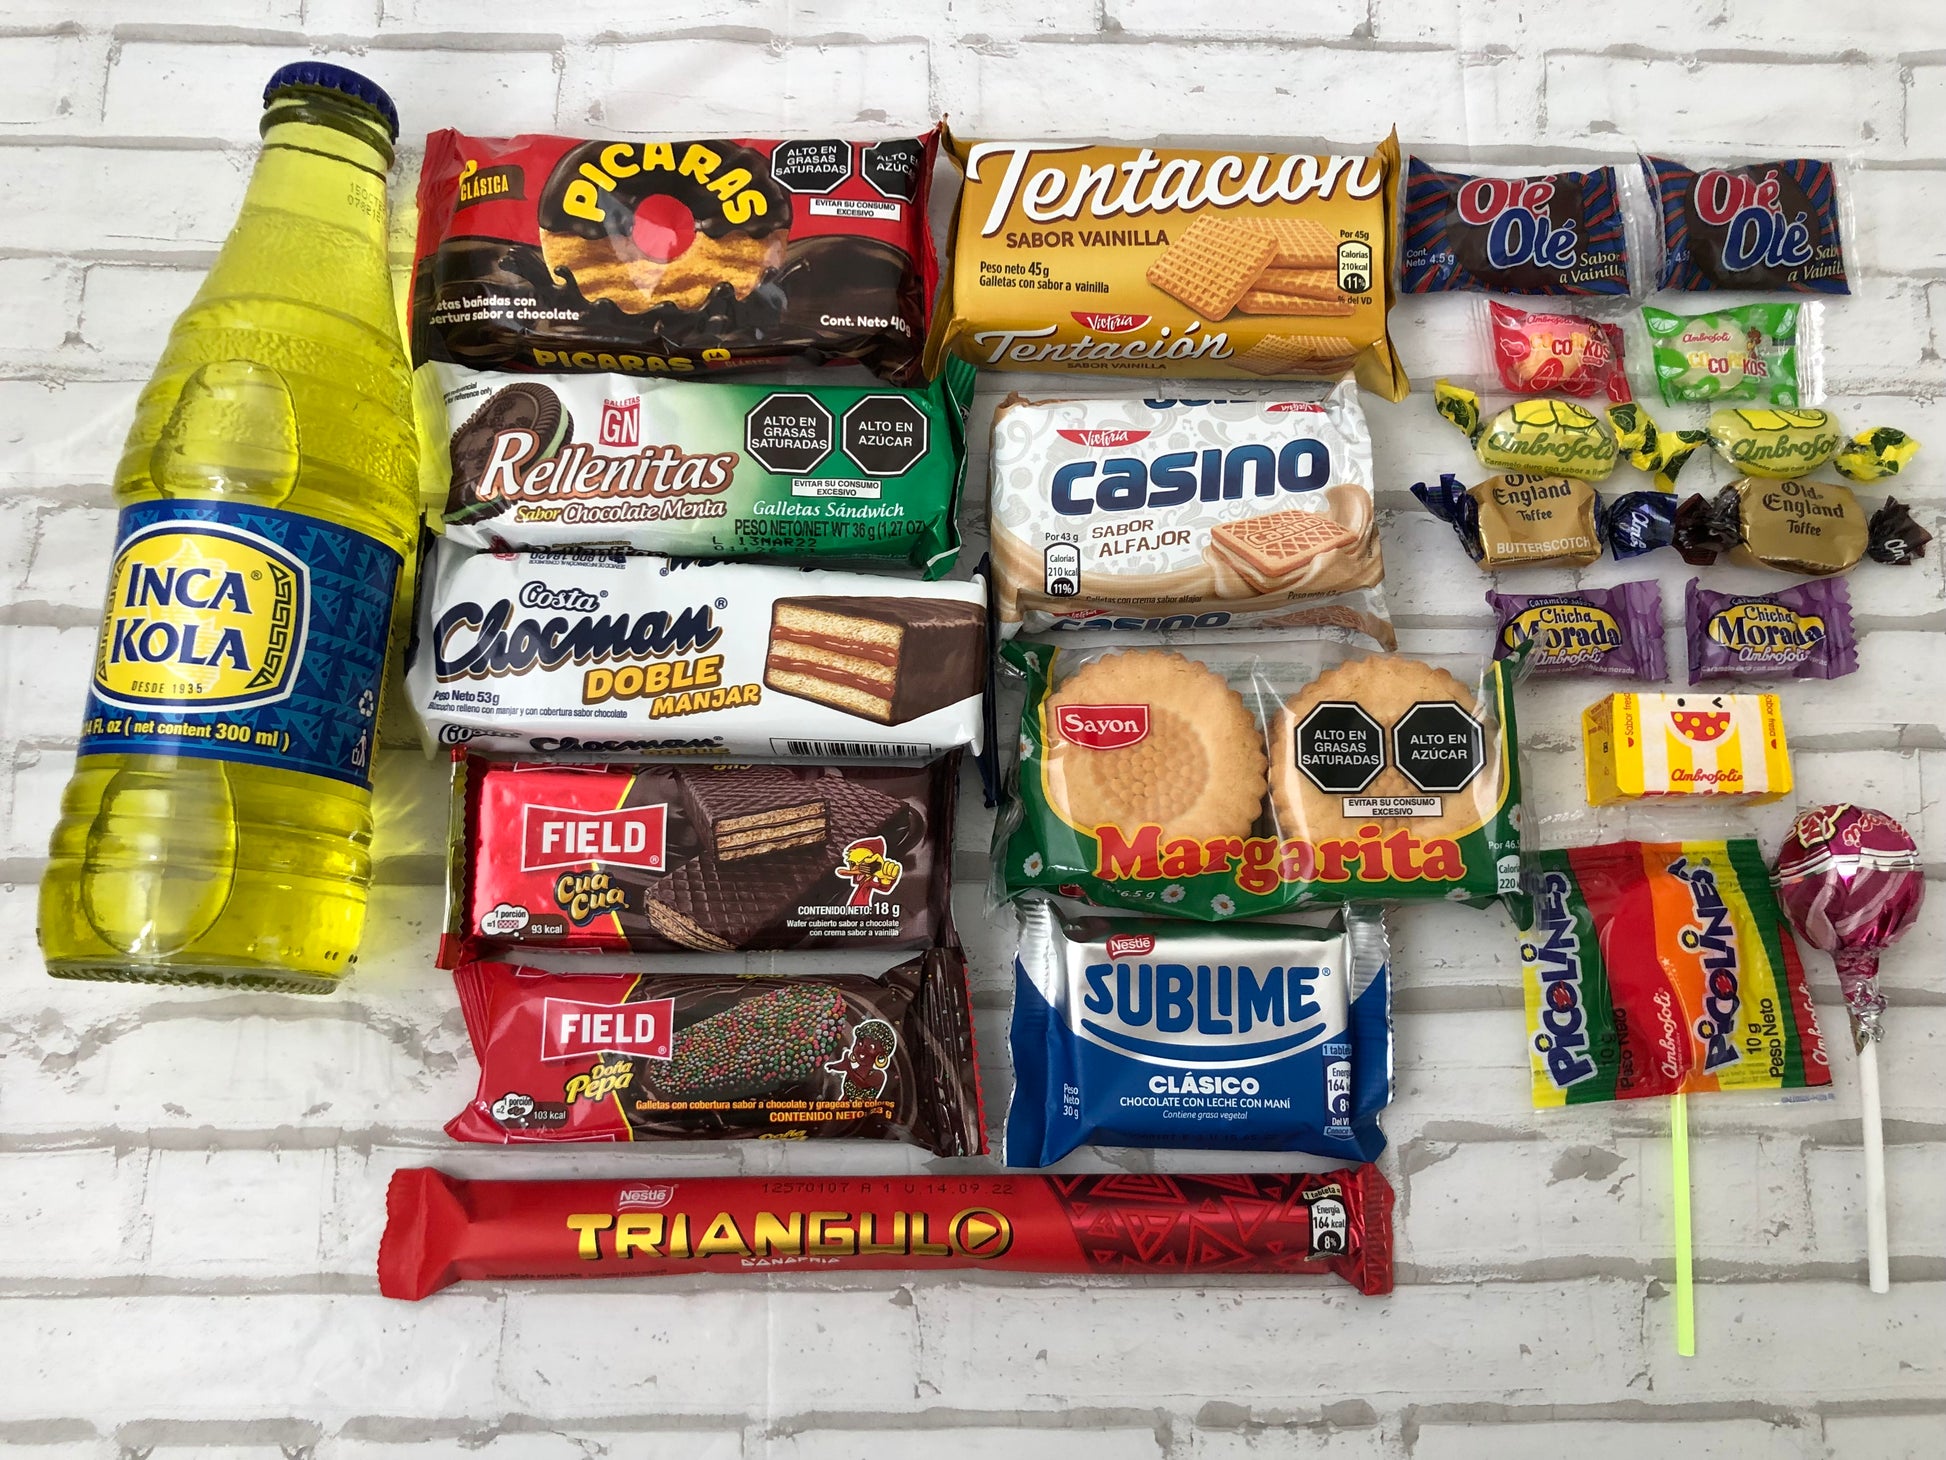 Peruvian Candy Box With Assortments Cookies Chocolates Candies & Inka Kola  Soda Sweet Treats From Peru Small Candy Gift Box With 22 Items 